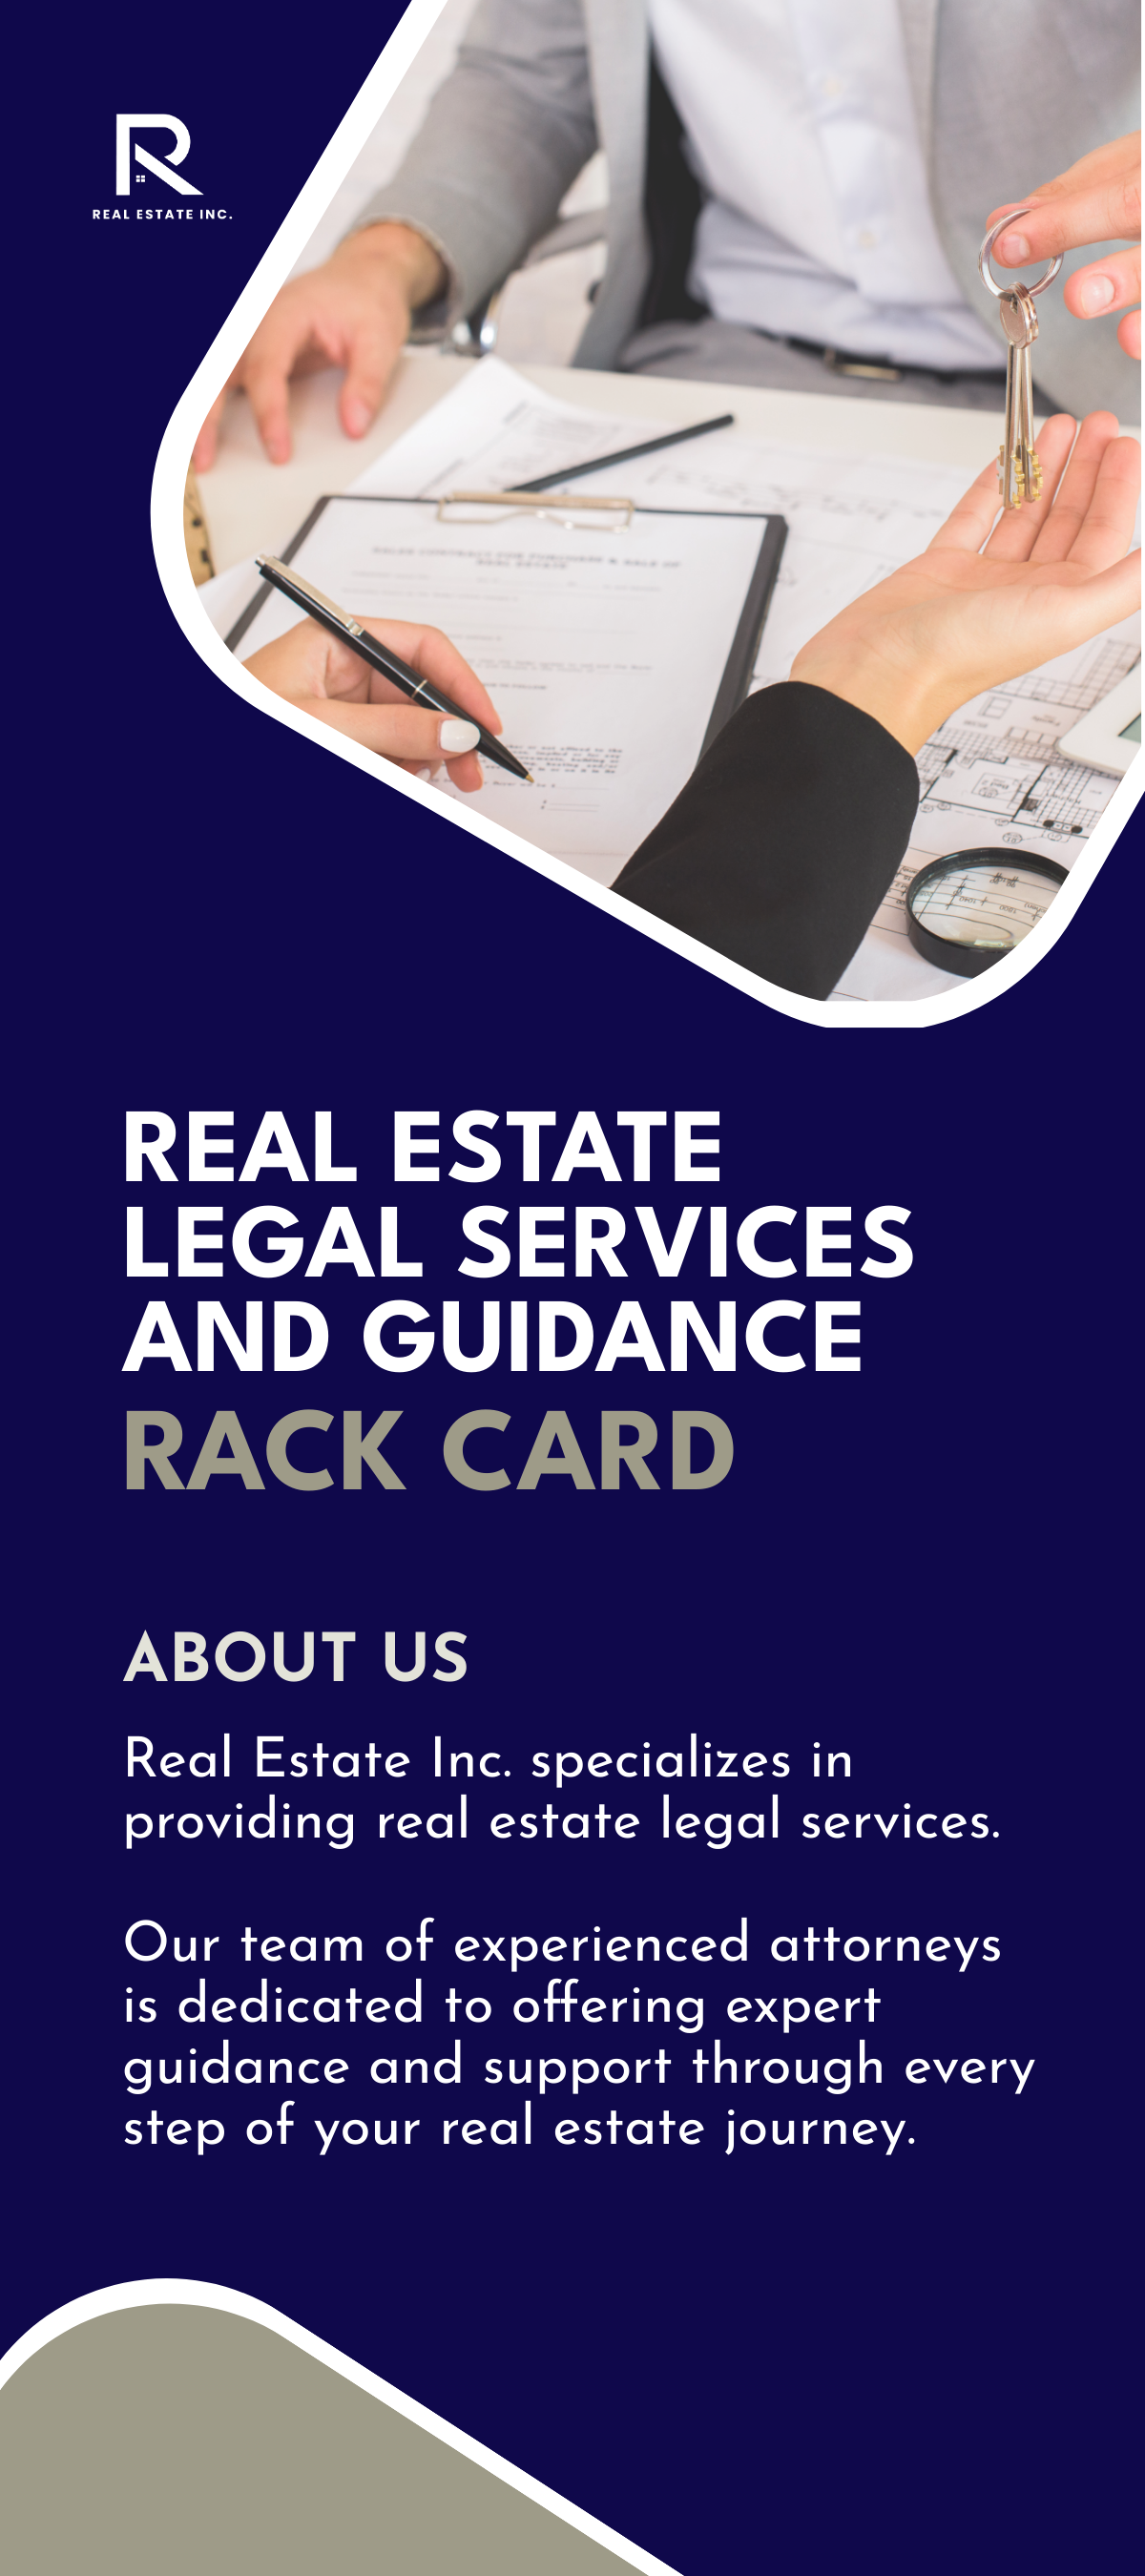 Real Estate Legal Services and Guidance Rack Card Template